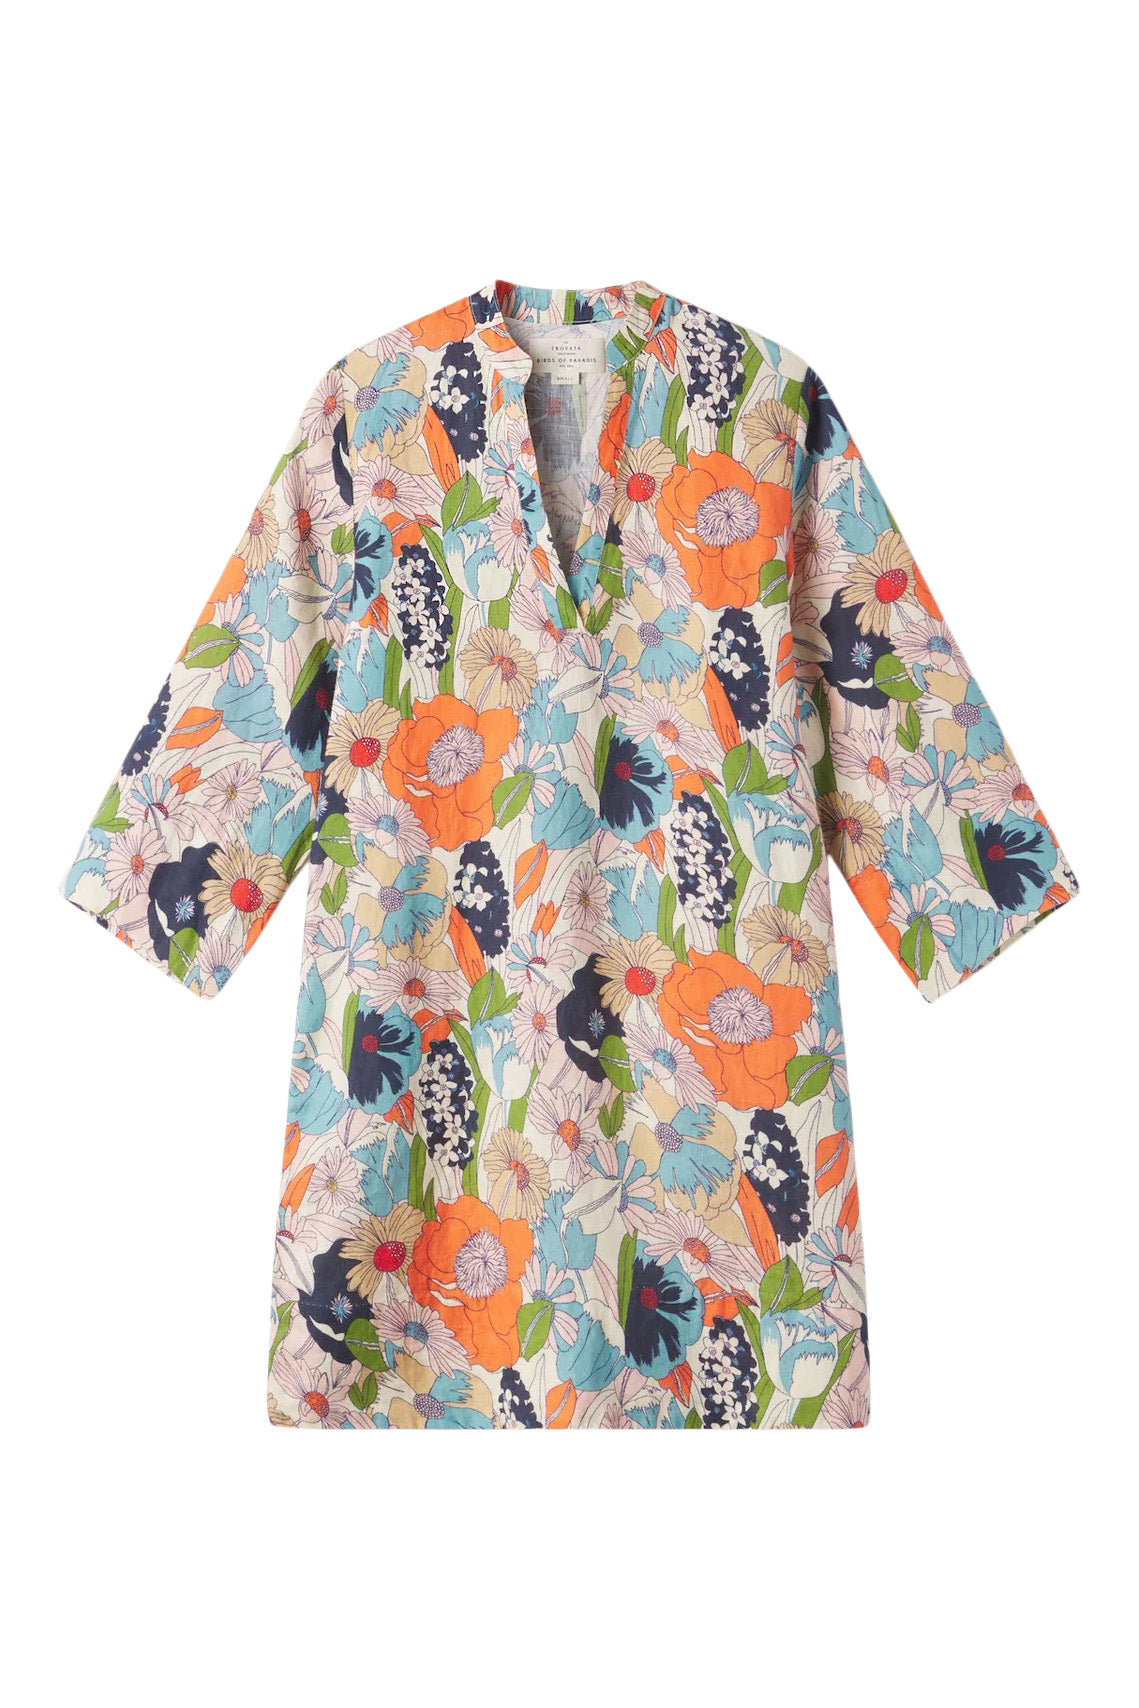 Trovata Birds of Paradis Lucca Shift Dress in Selva Floral